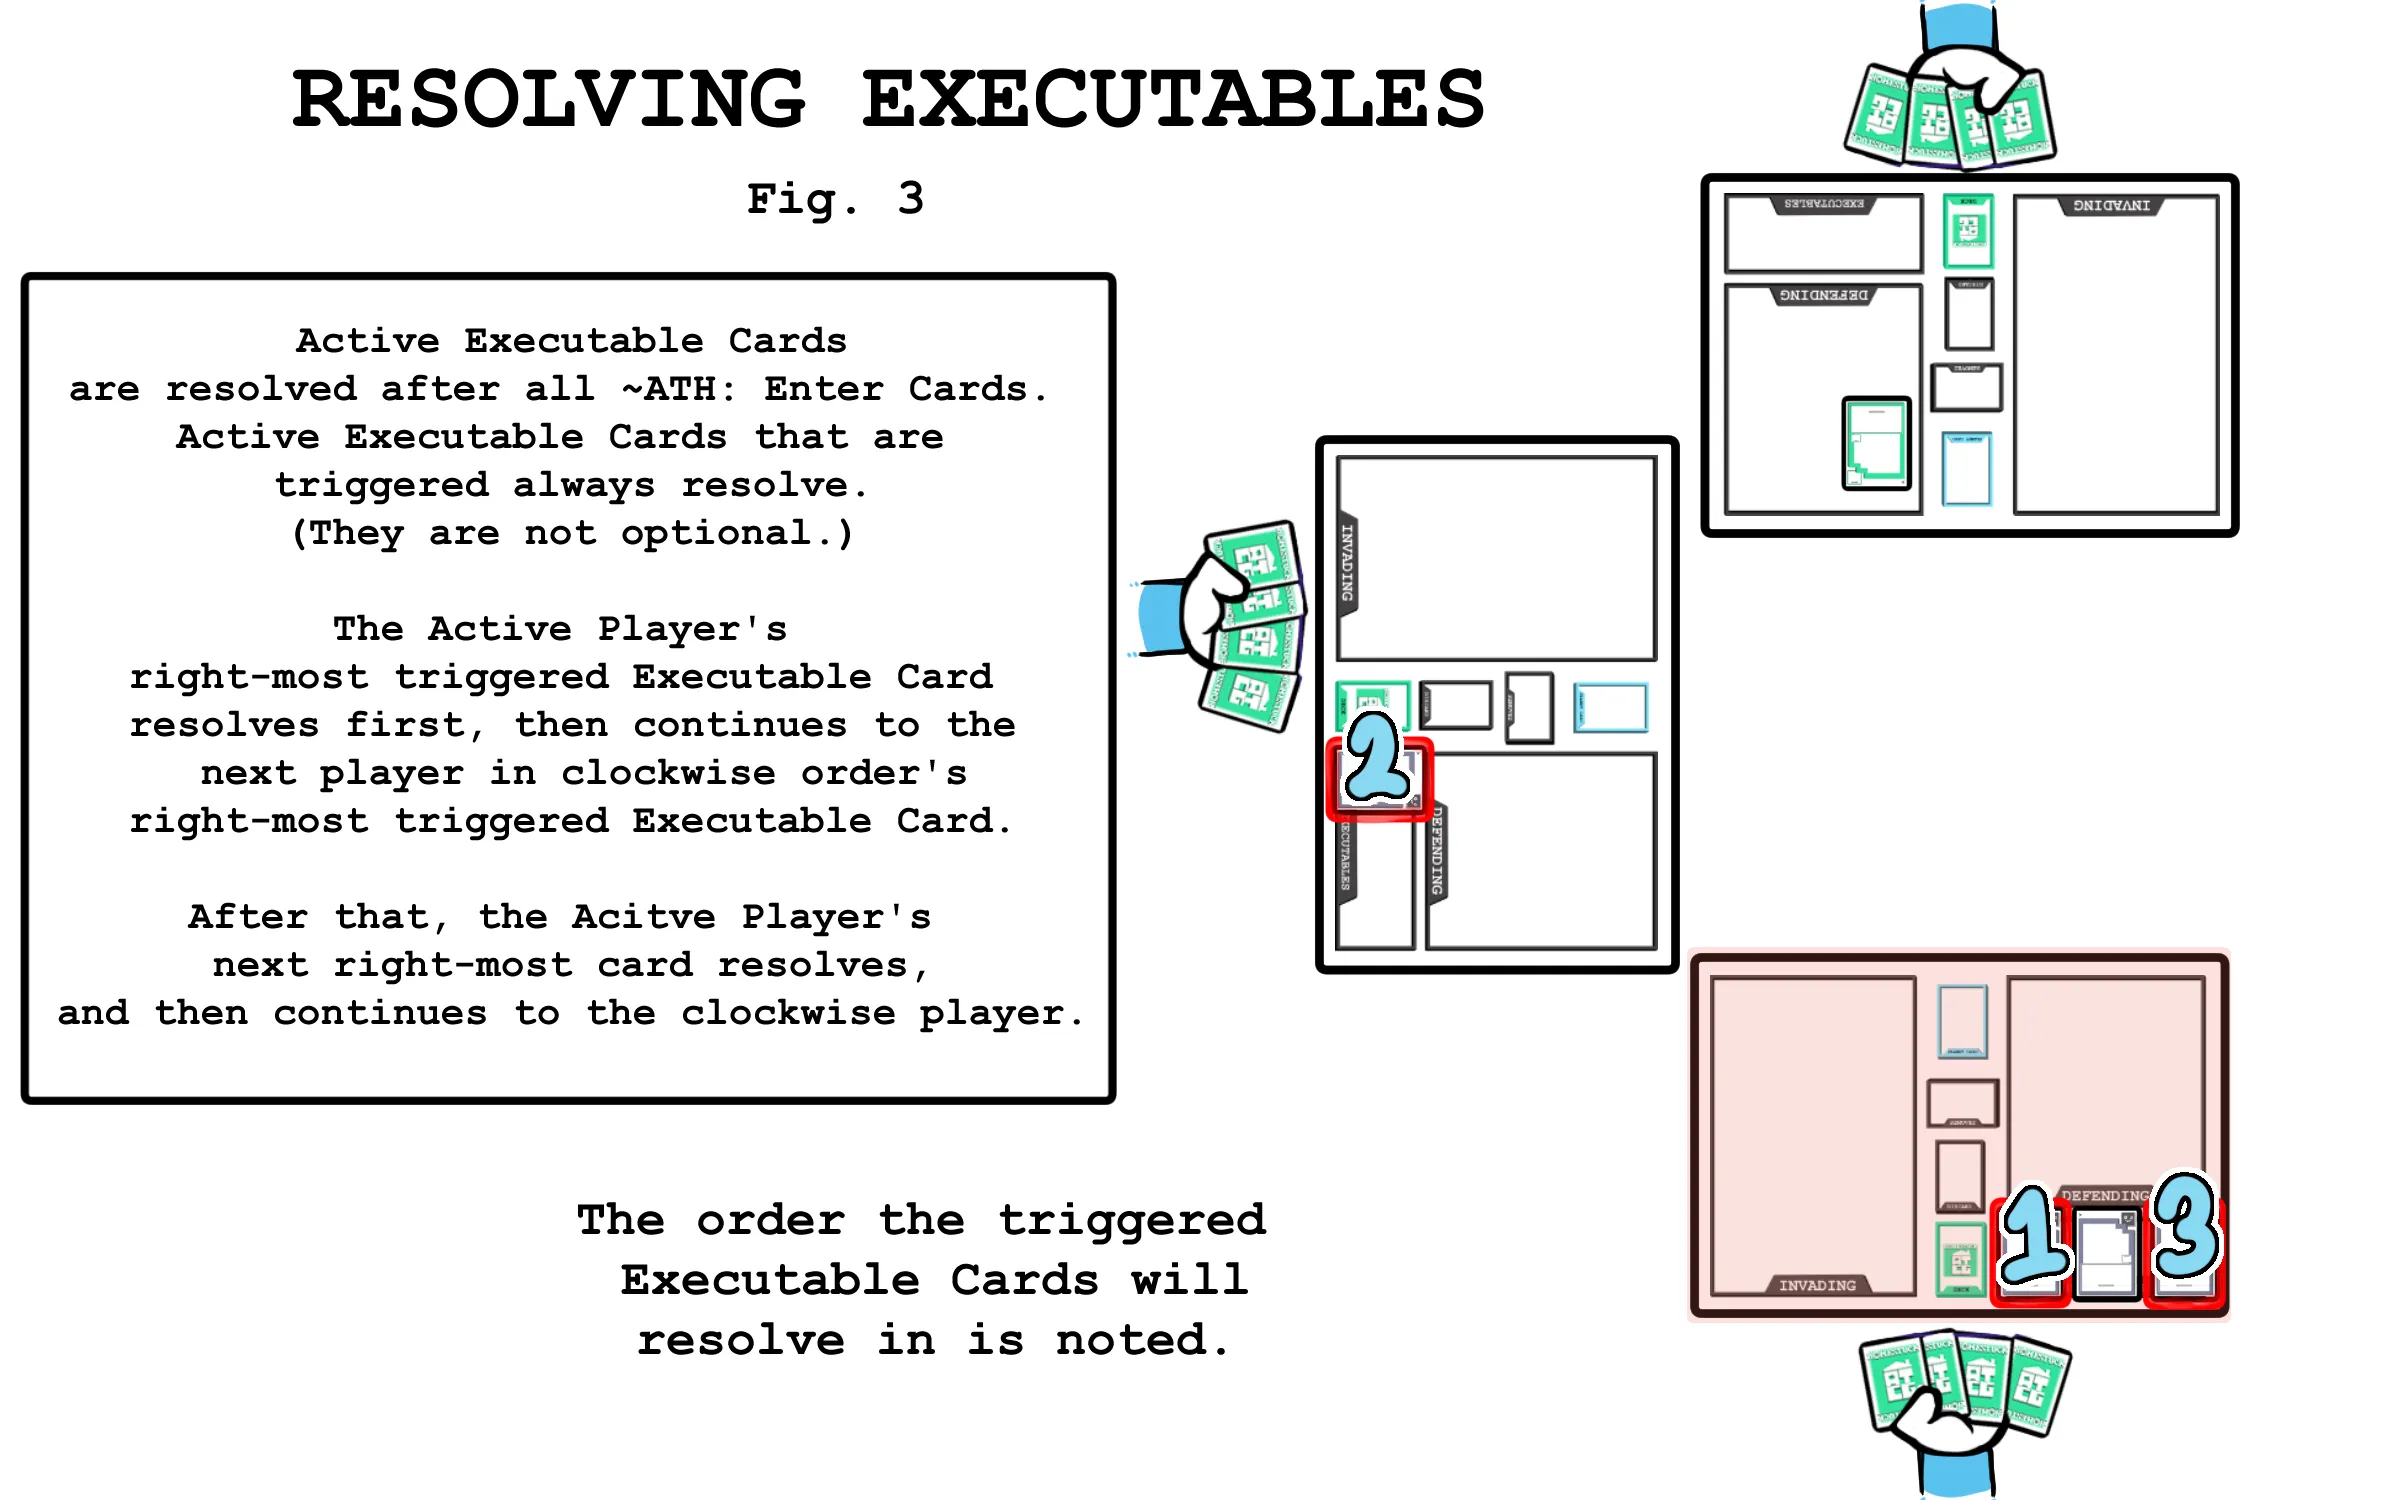 Active Executable Cards are resolved after all ~ATH: Enter Cards. Active Executable Cards that are triggered always resolve -- they are not optional. The Active Player's right-most triggered Executable Card resolves first, then continues to the next player in clockwise order's right-most triggered Executable Card. After that, the Active Player's next right-most card resolves, and then continues to the clockwise player. From the cards that still need to be resolved in Figure 2, the order of resolution is bottom player's left-most card, middle player's card, and then bottom player's right-most card.